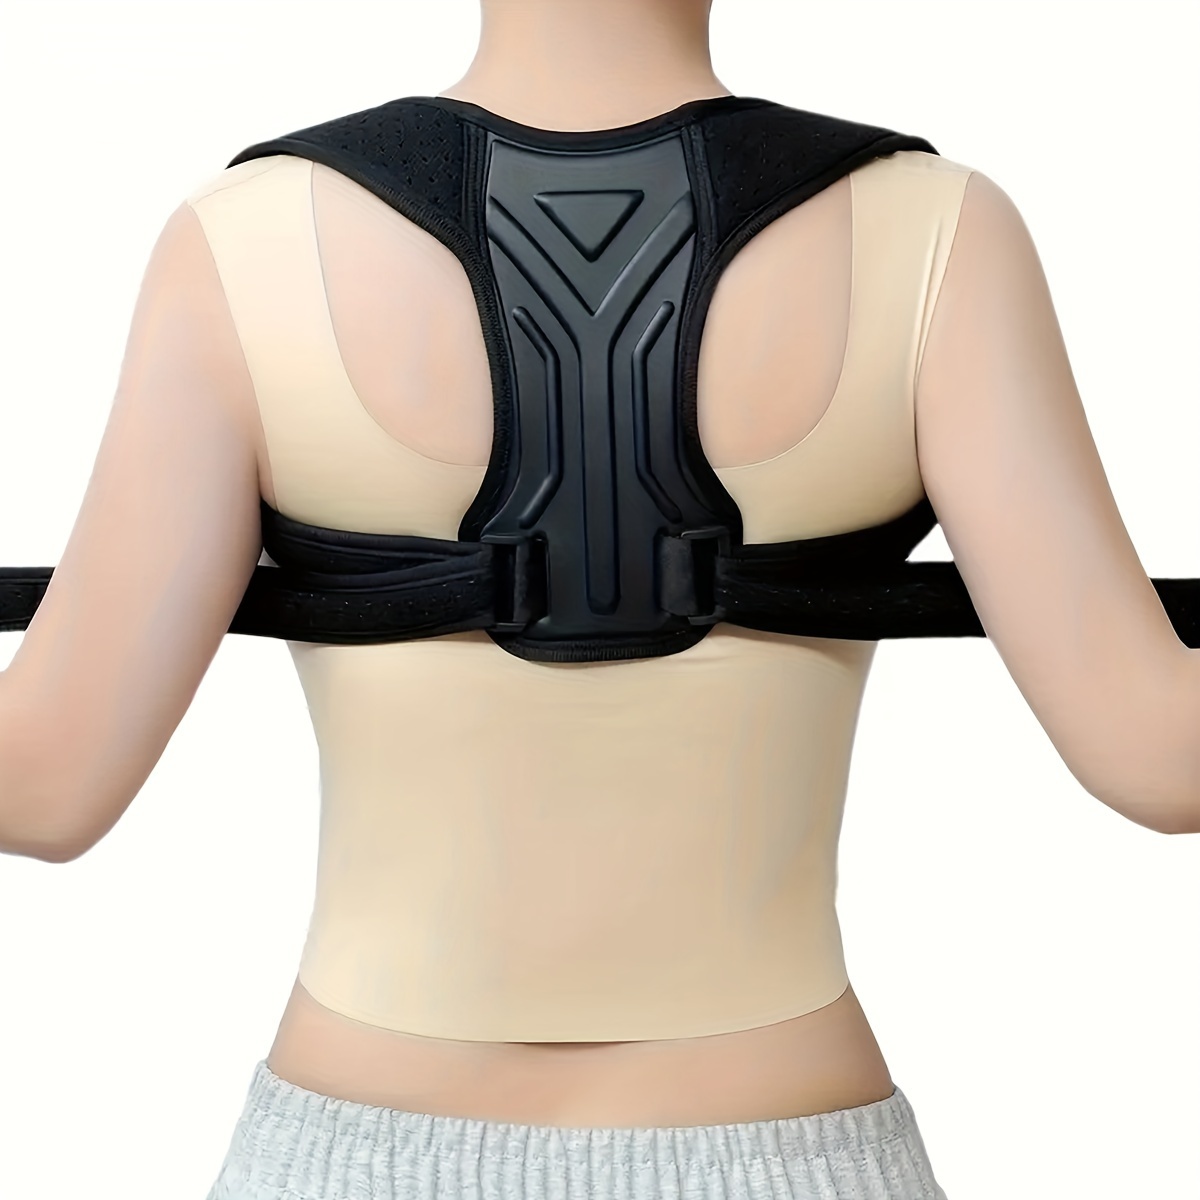  Posture Corrector For Women And Men, Adjustable Back Posture  Belt, Back Brace For Posture For Women, Pain Relief From Back, Posture Brace  Provides Support And Shape For Neck, Shoulders And